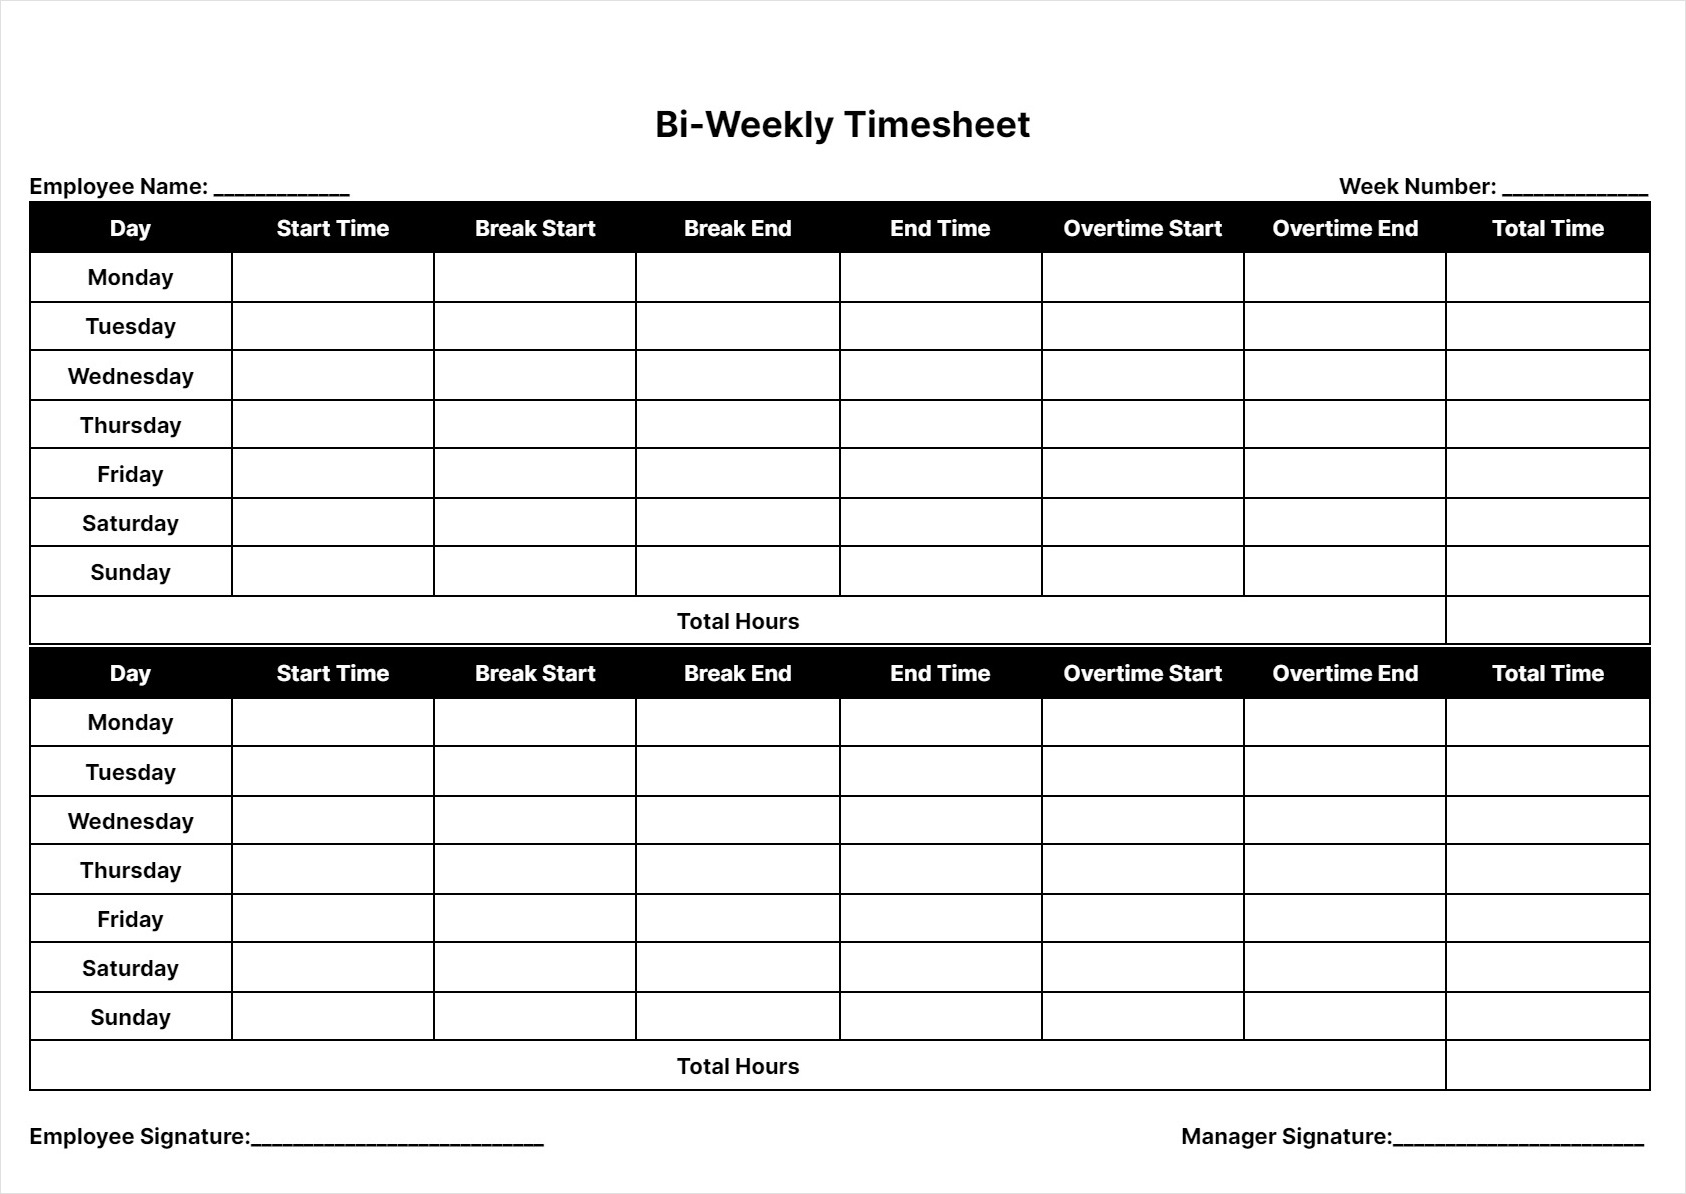 bi monthly timesheet template example